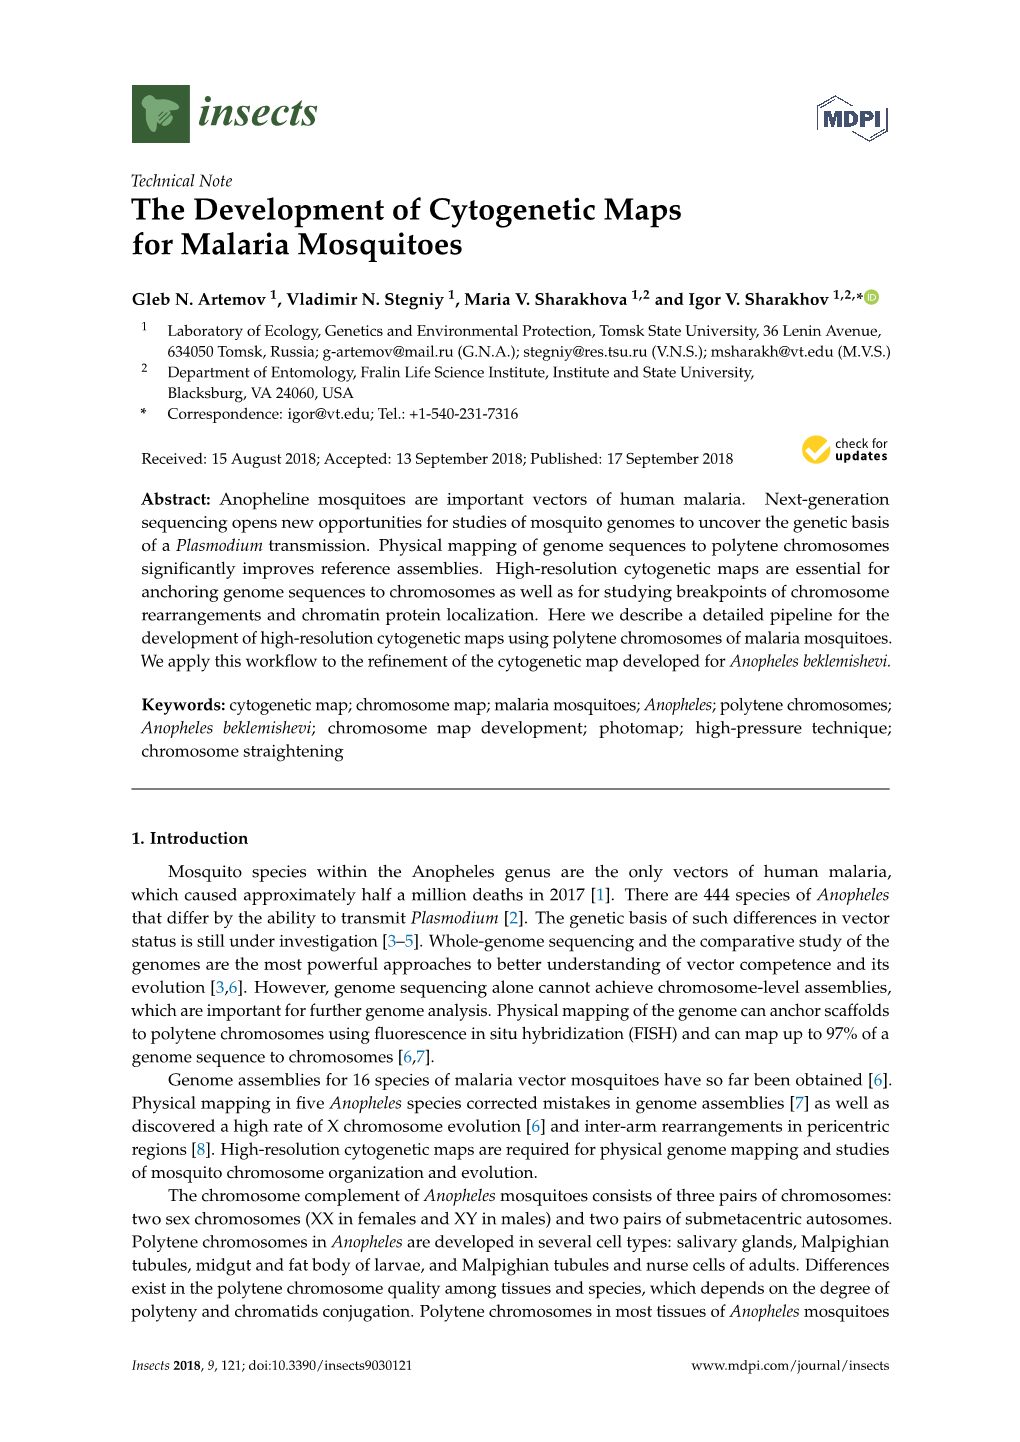 The Development of Cytogenetic Maps for Malaria Mosquitoes